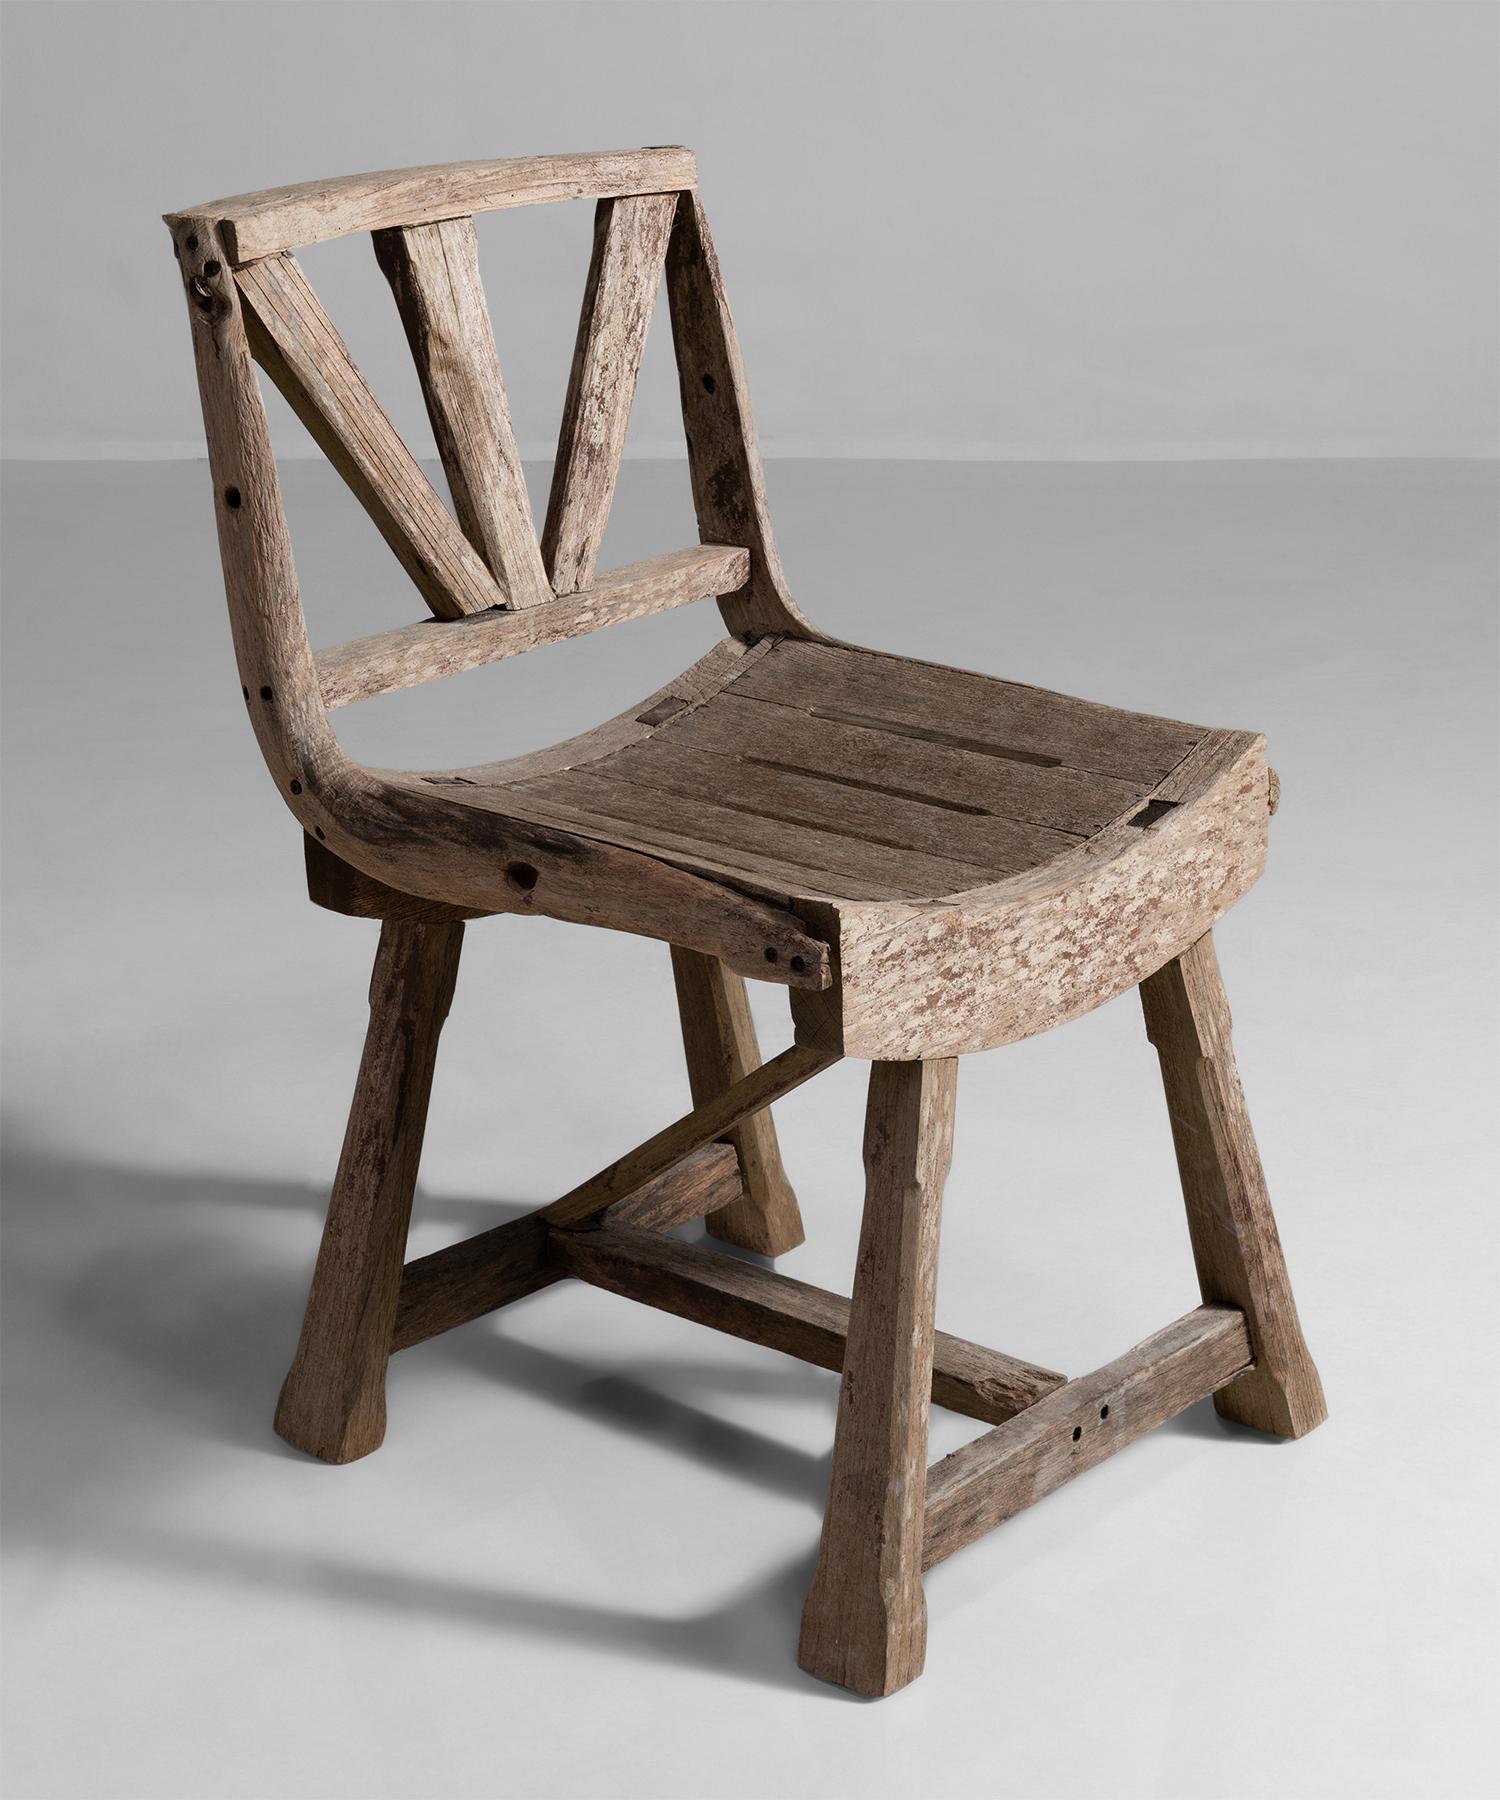 Primitive Weathered oak chair, England, circa 1910

Weathered sculptural seat, unique form, with handsome pale patina.